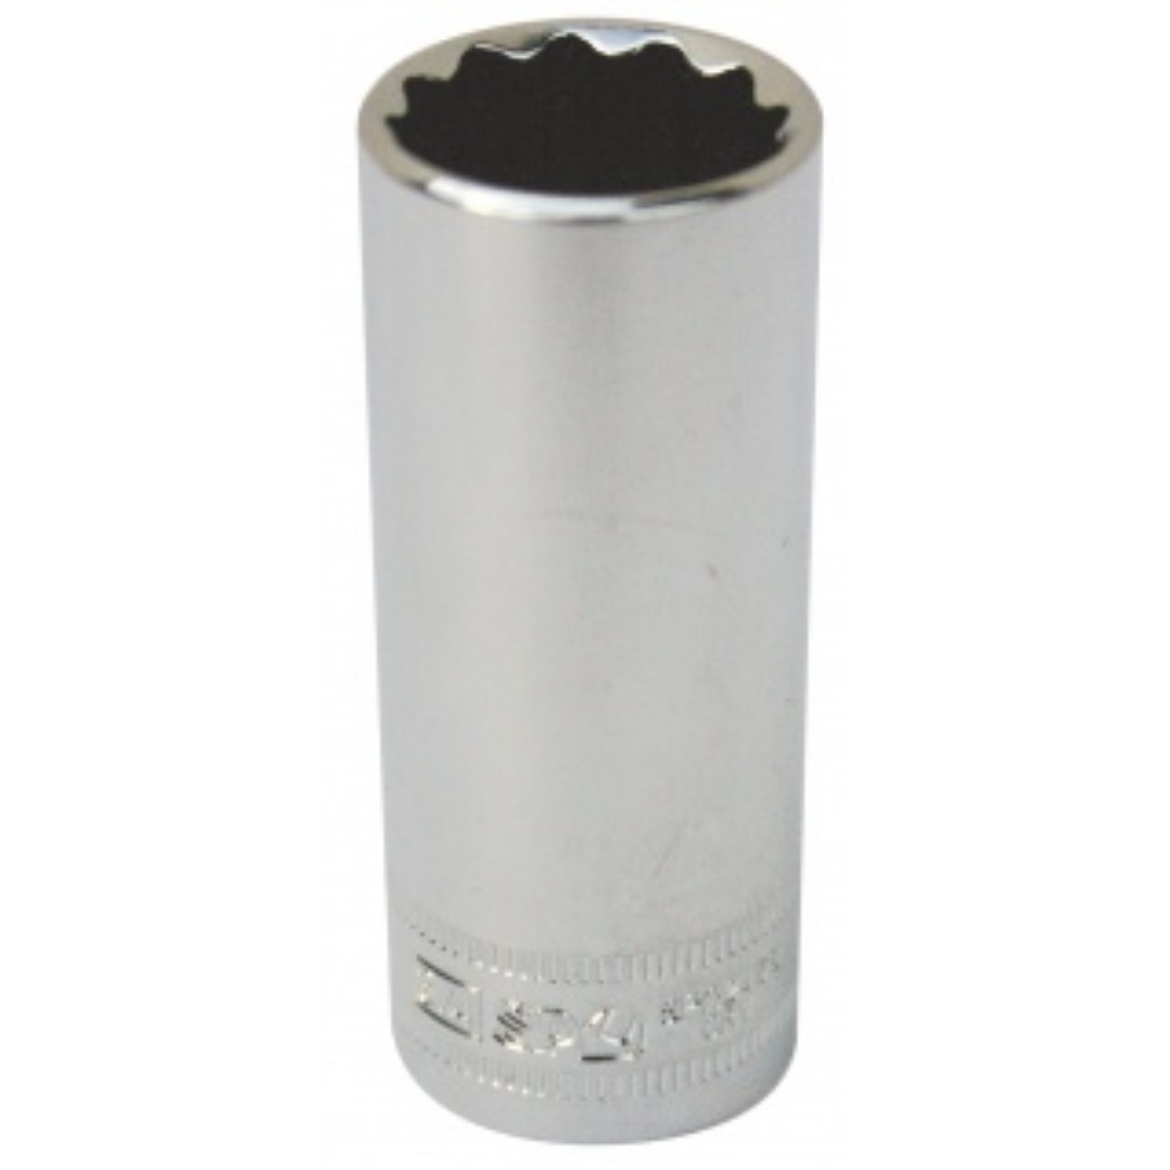 Picture of SOCKET DEEP 3/8"DR 12PT METRIC 13MM SP TOOLS